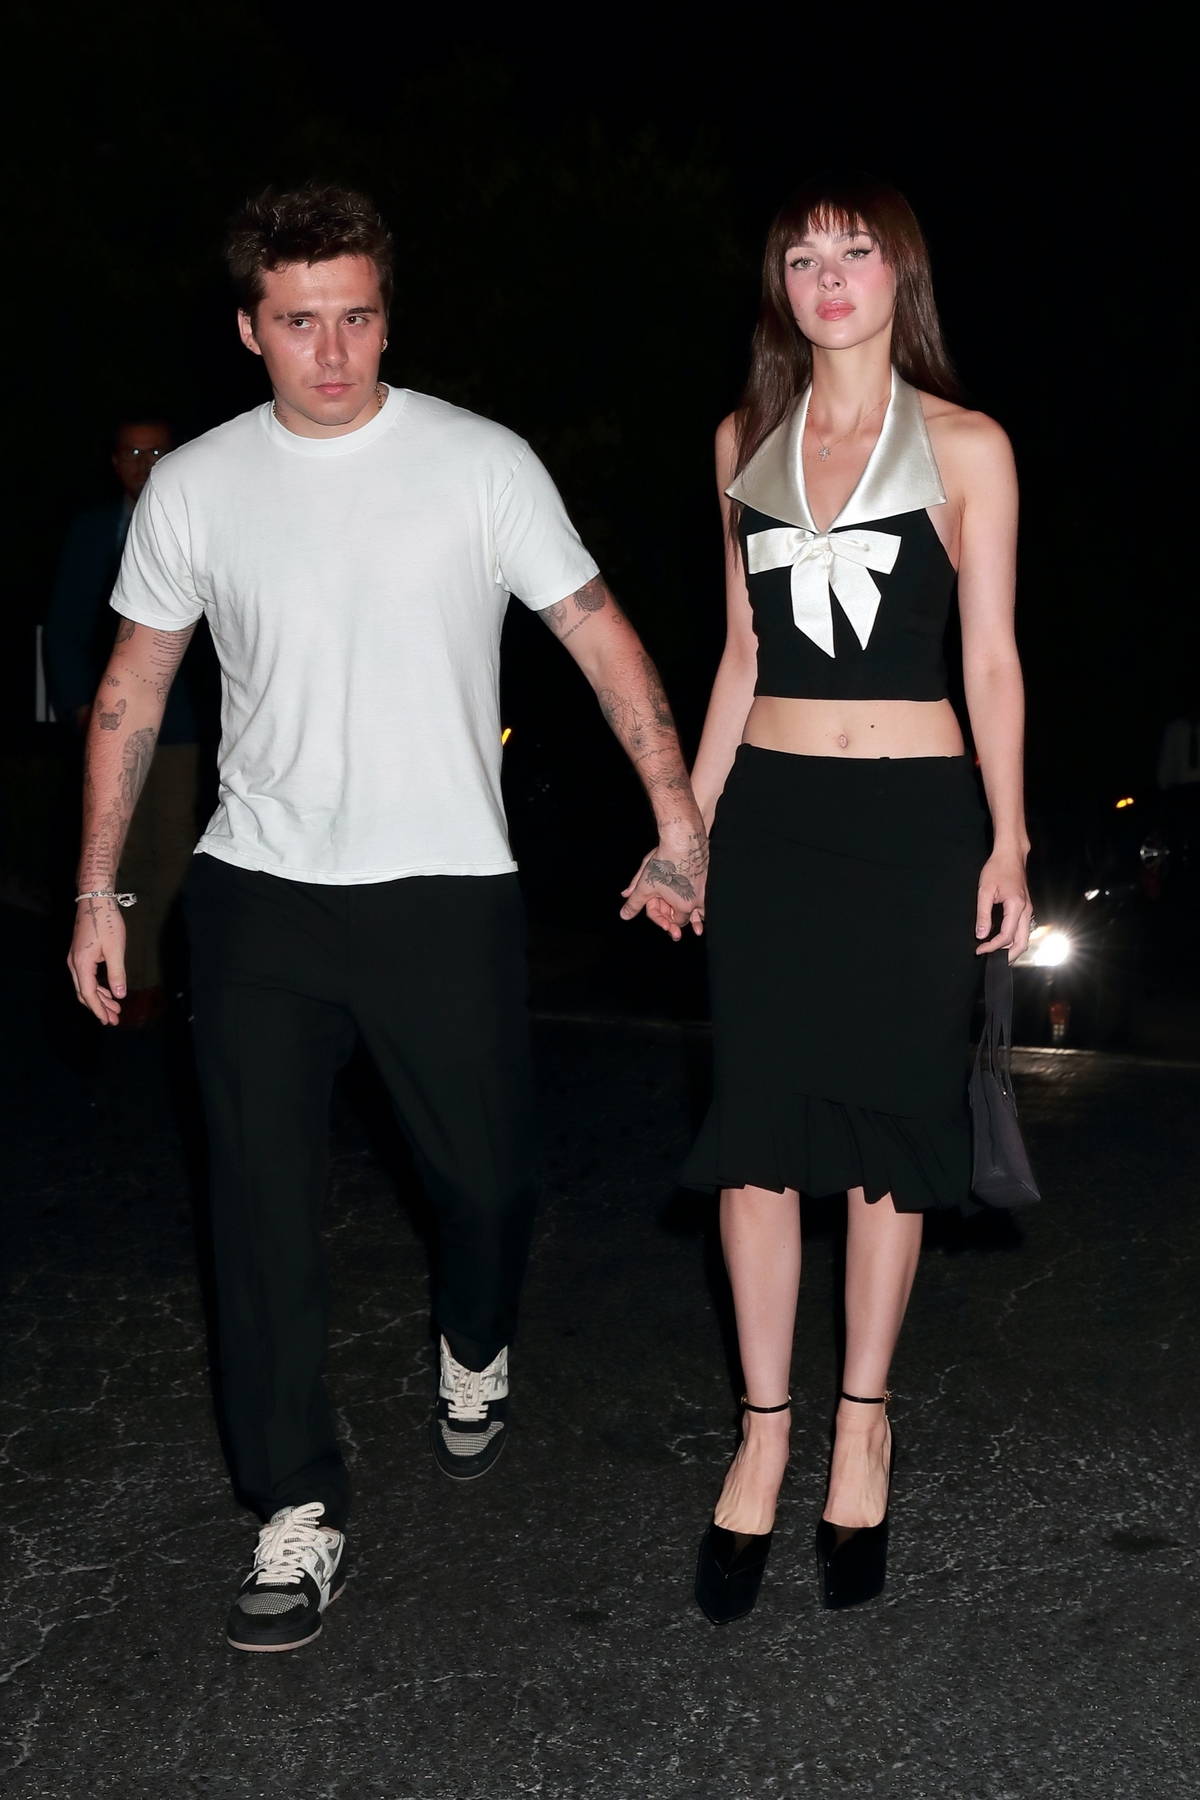 Nicola Peltz and Brooklyn Beckham attend an after-show party at Offsunset in  West Hollywood, California